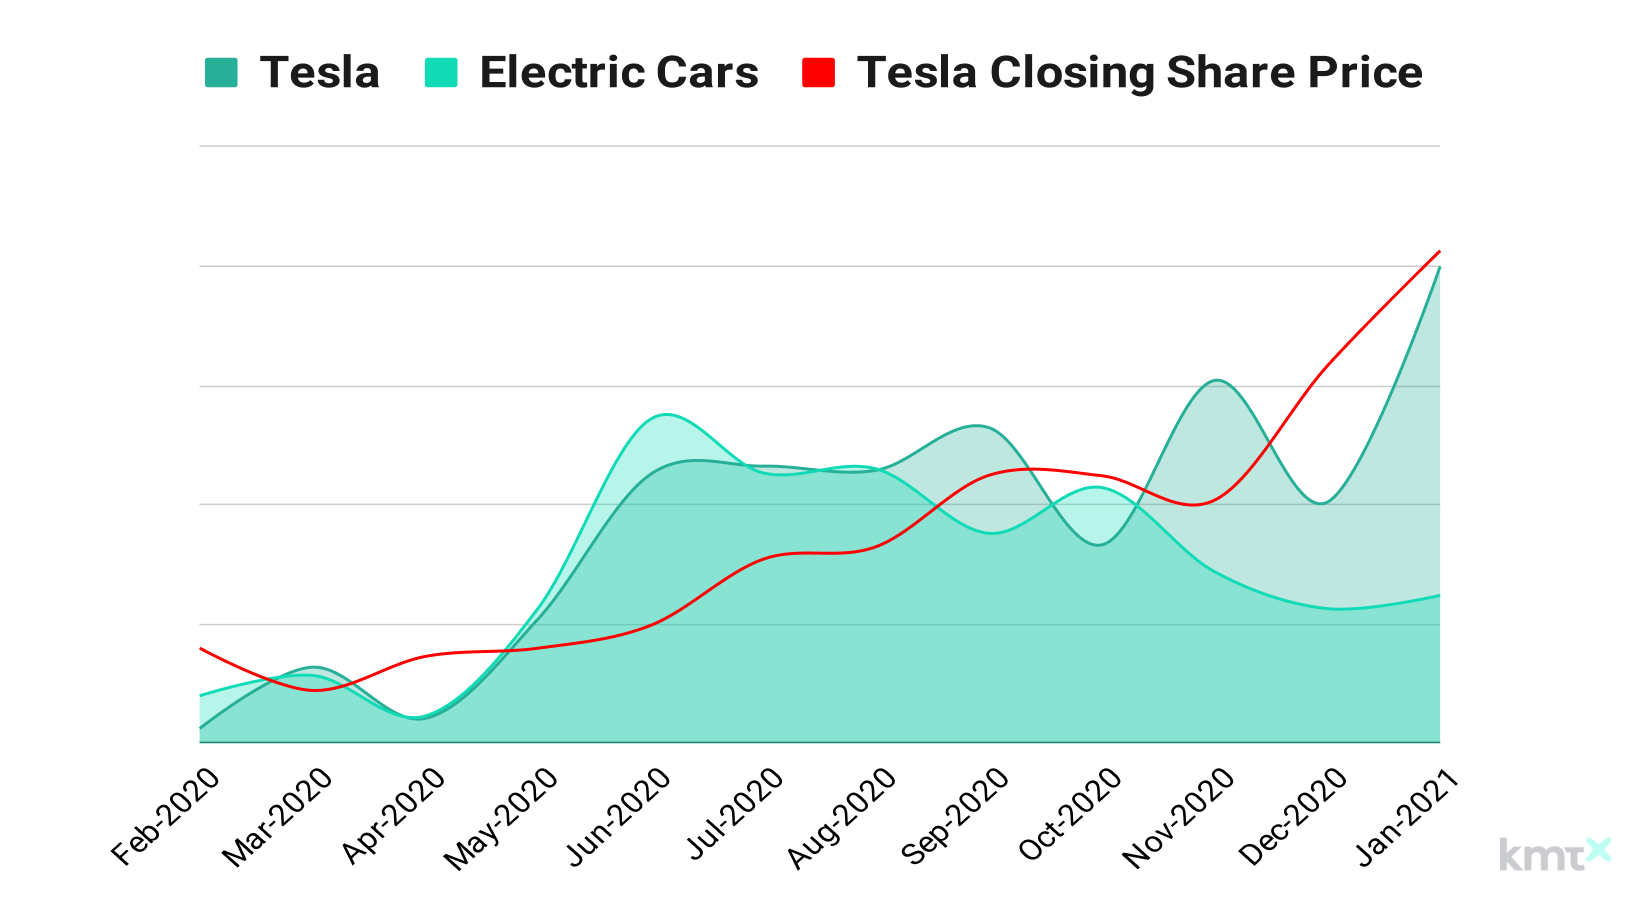 Electric Cars and Tesla